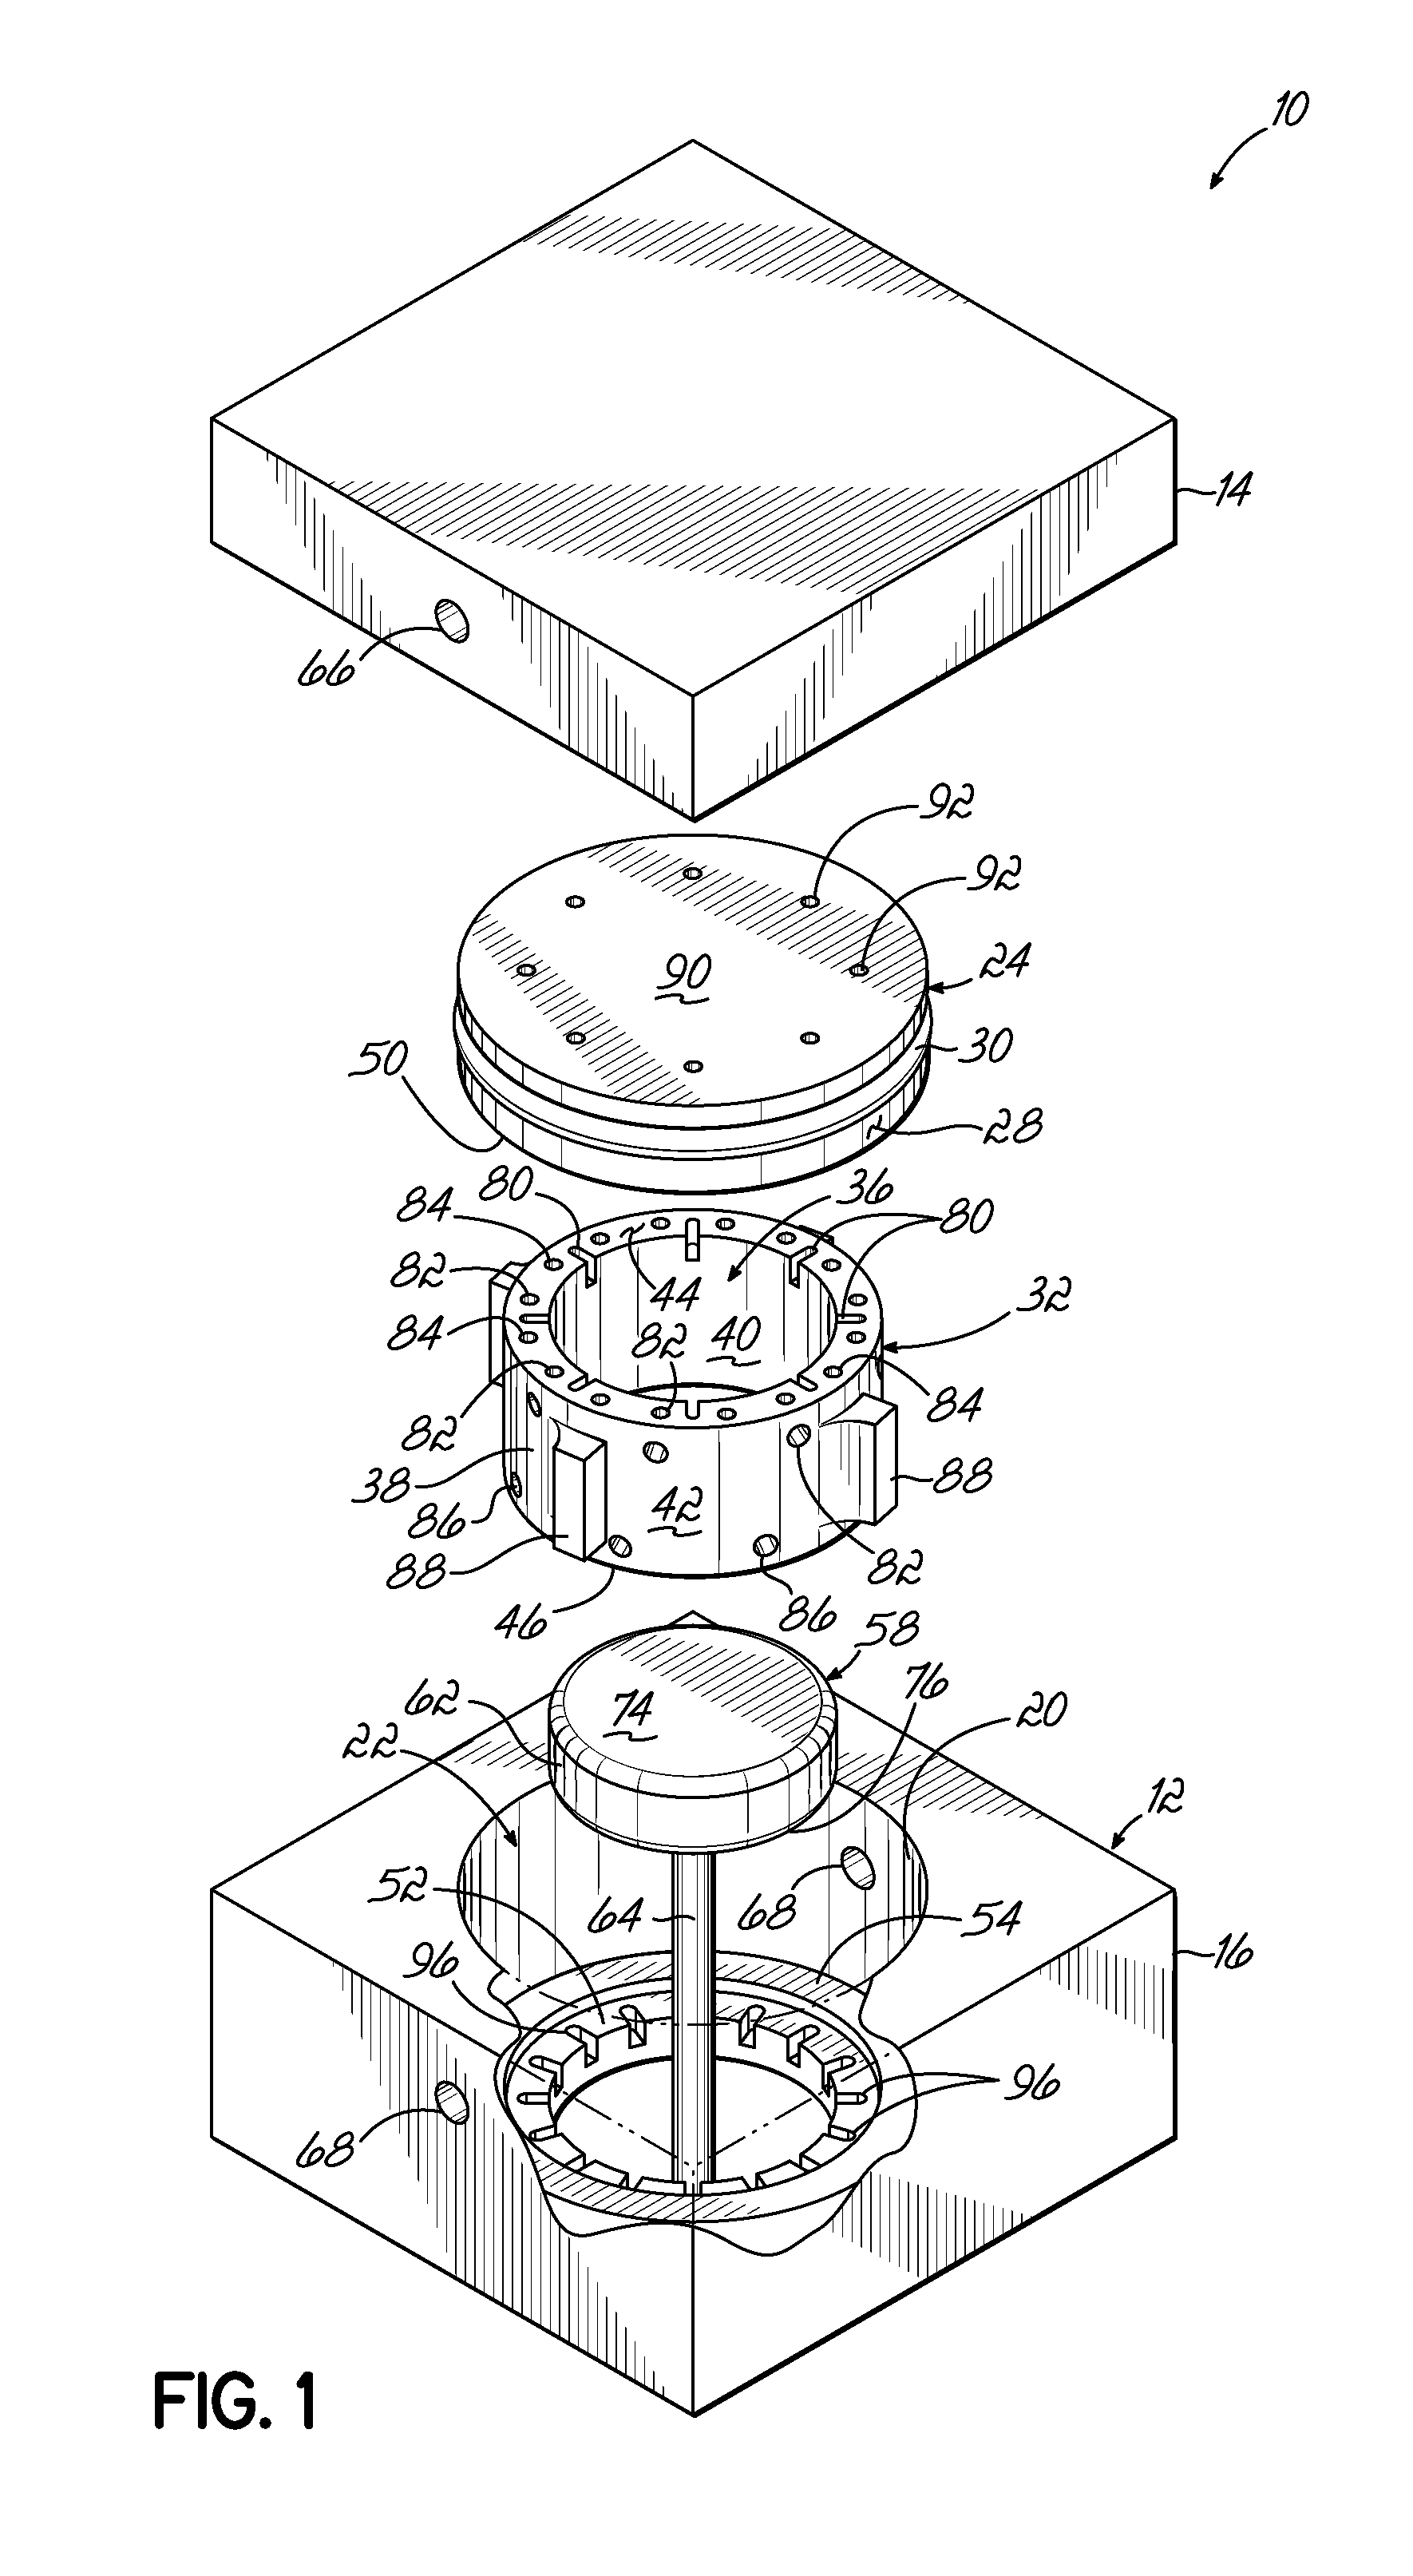 Dispensing module and method of dispensing with a pneumatic actuator